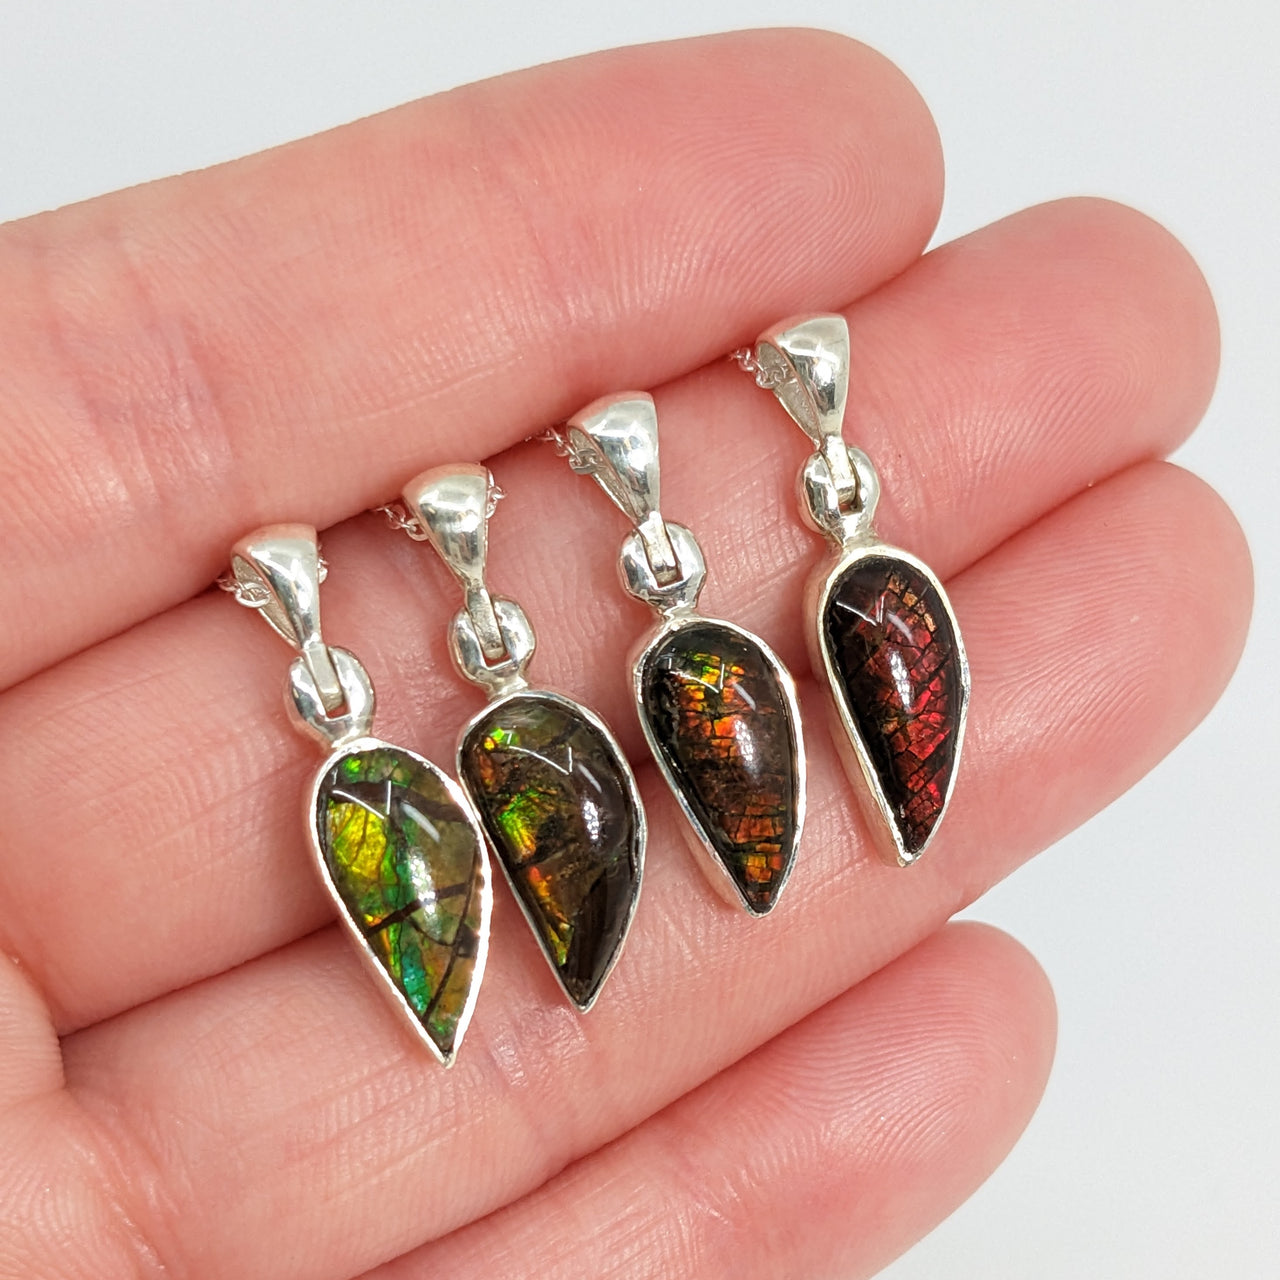 Ammolite 18" Sterling Silver Pendant (approx. 3g) #SK8914